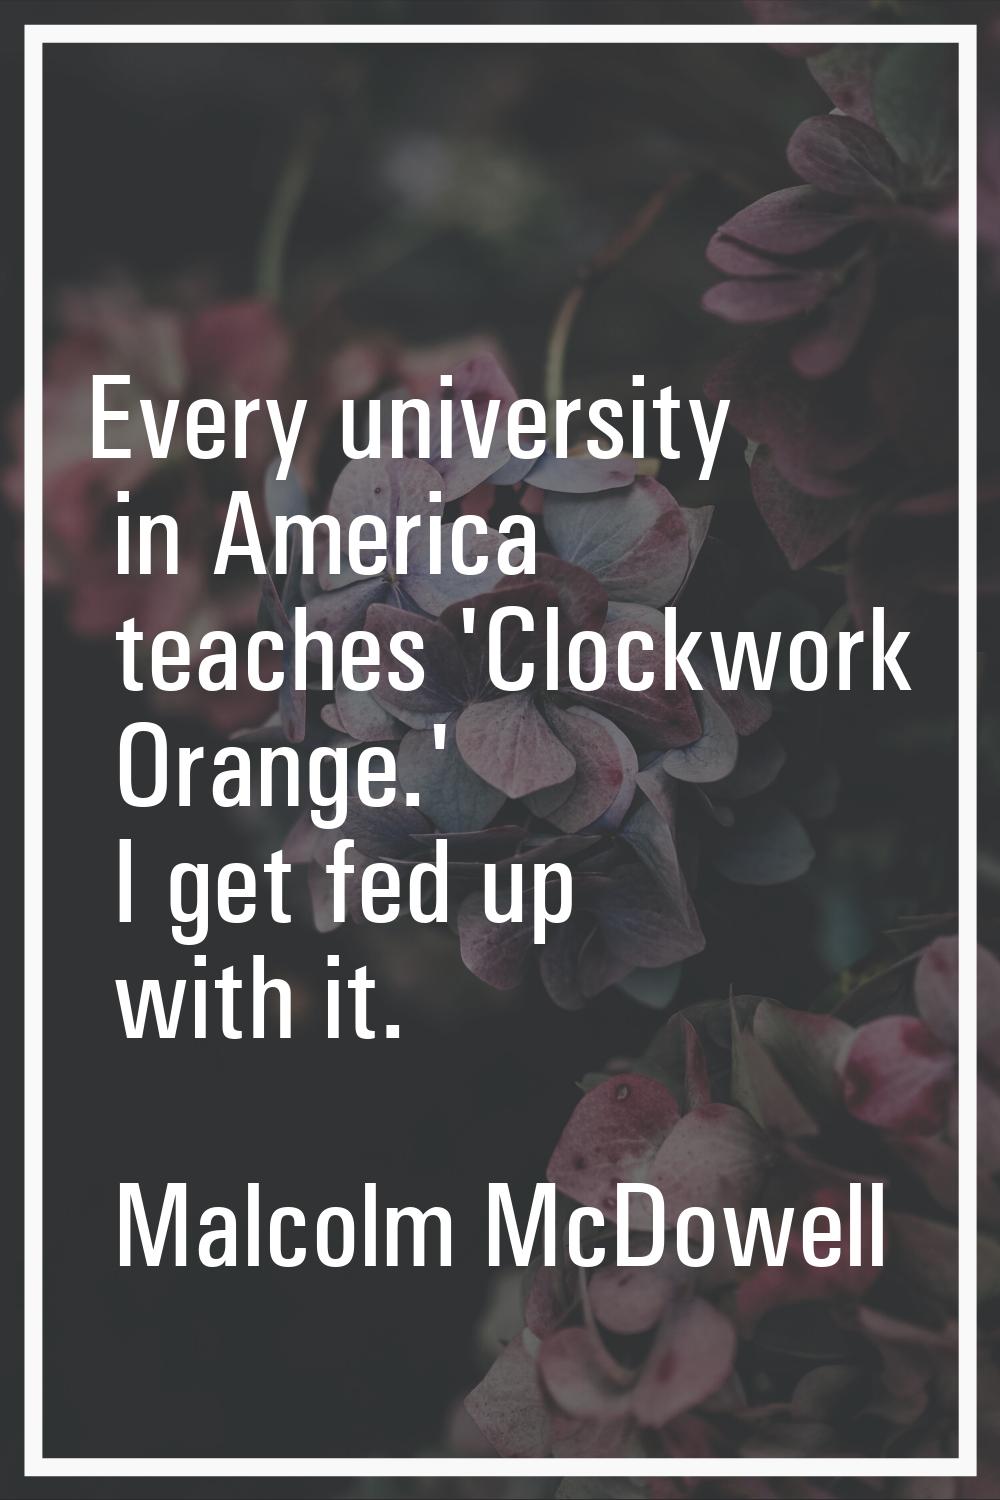 Every university in America teaches 'Clockwork Orange.' I get fed up with it.